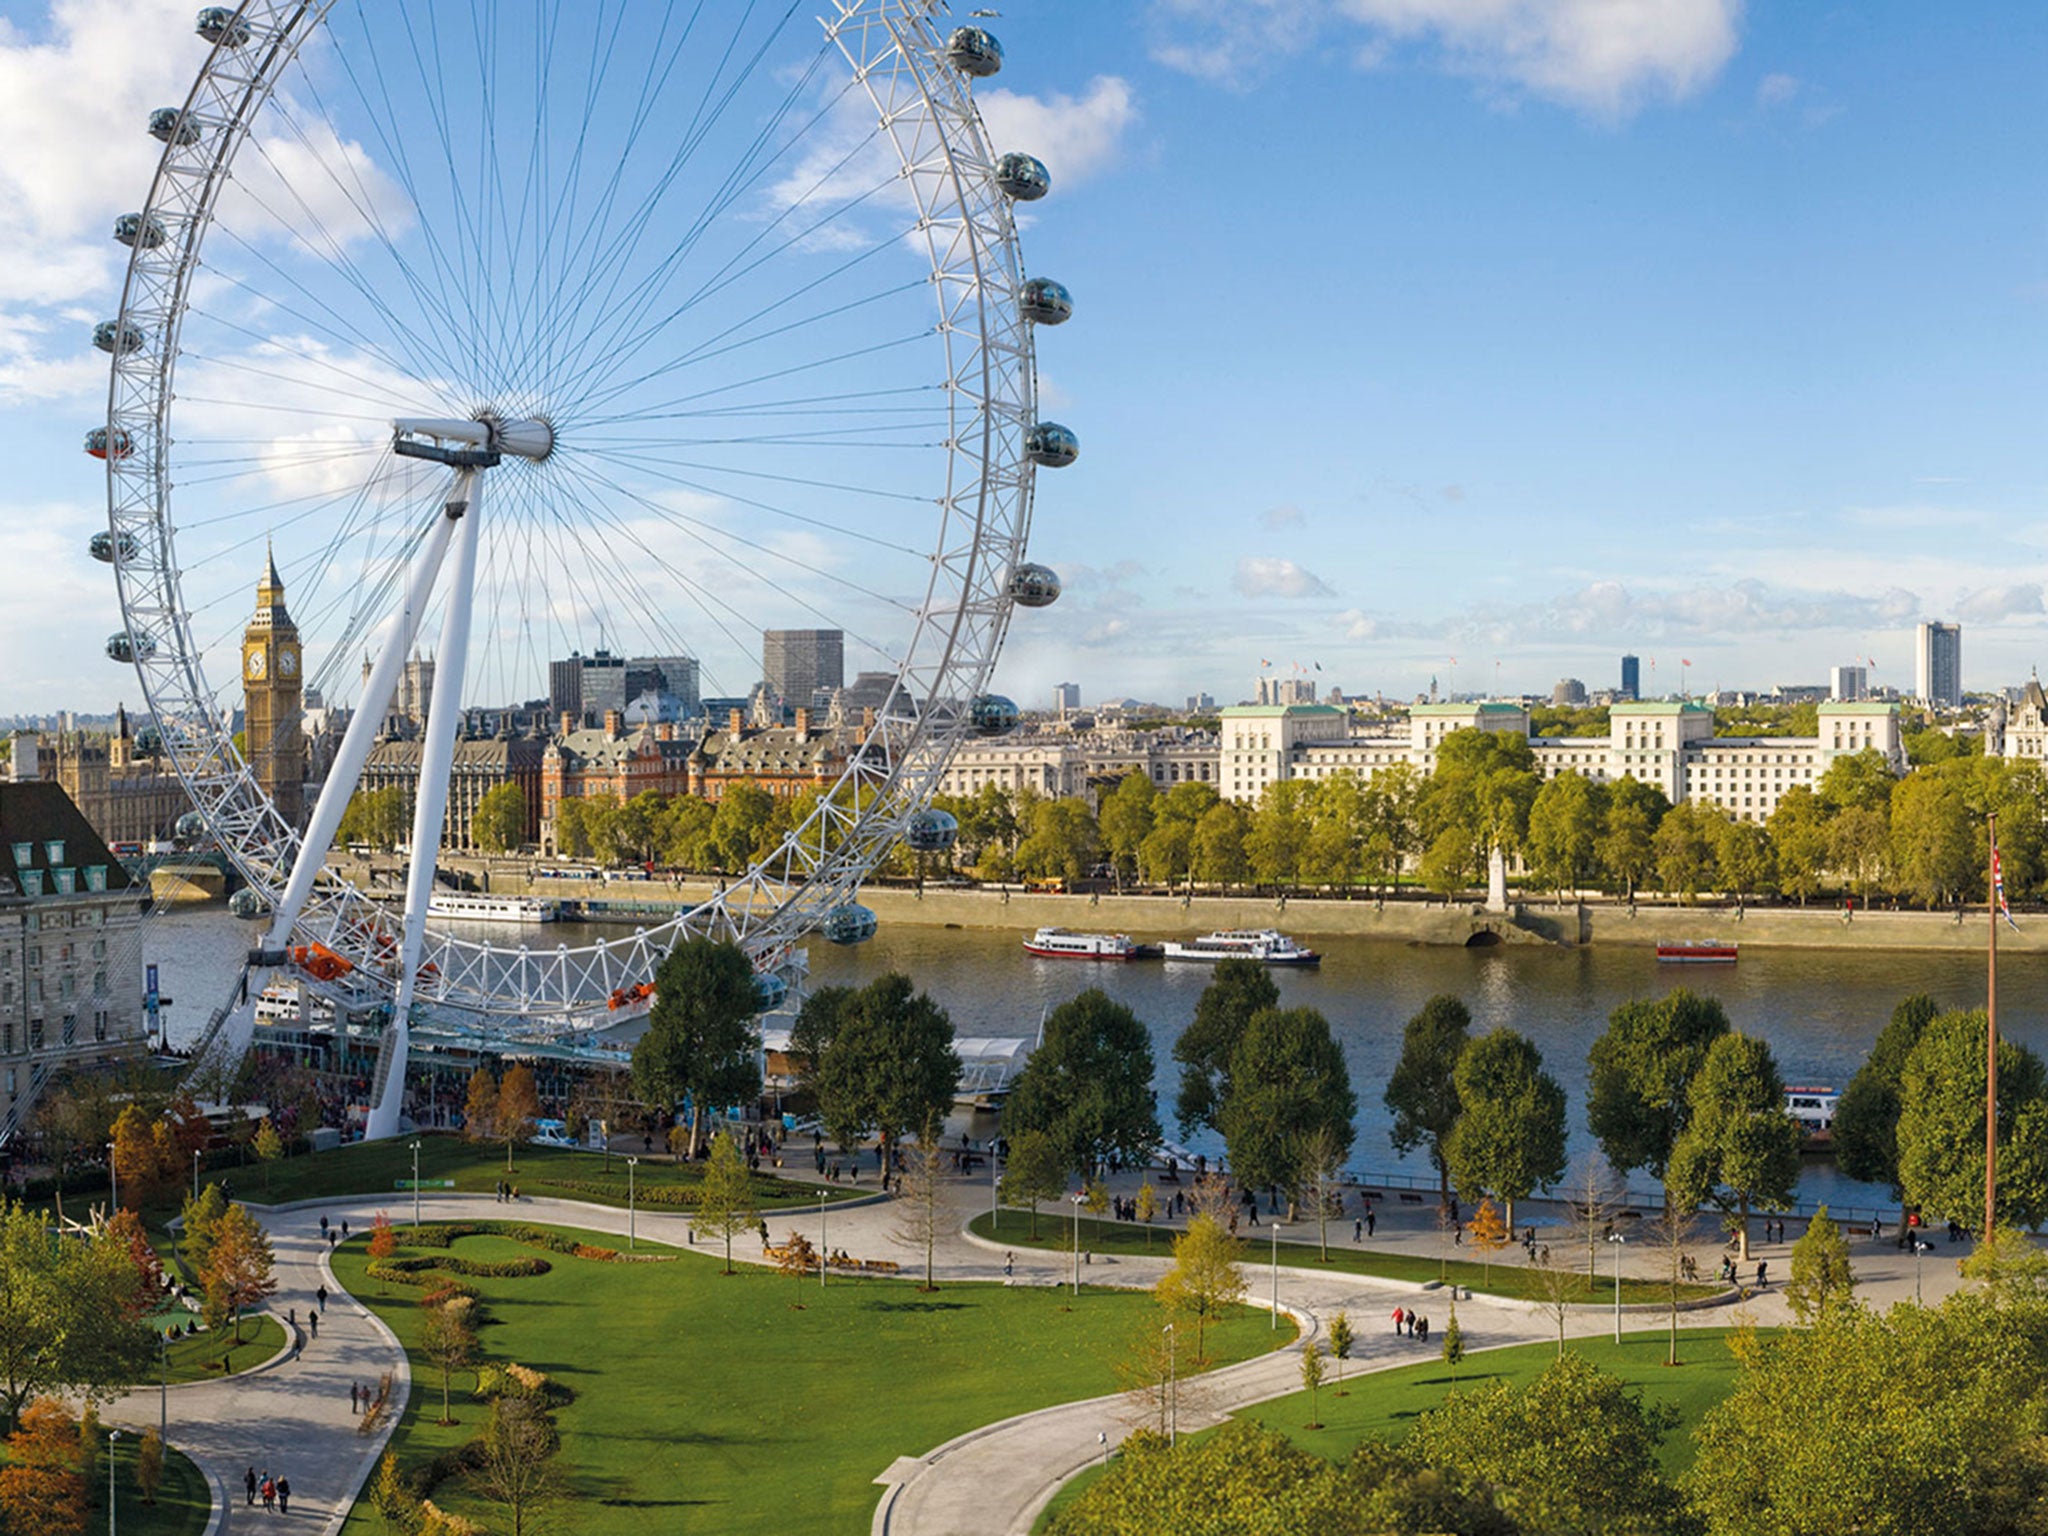 The South Bank is home to a number of London's cultural landmarks